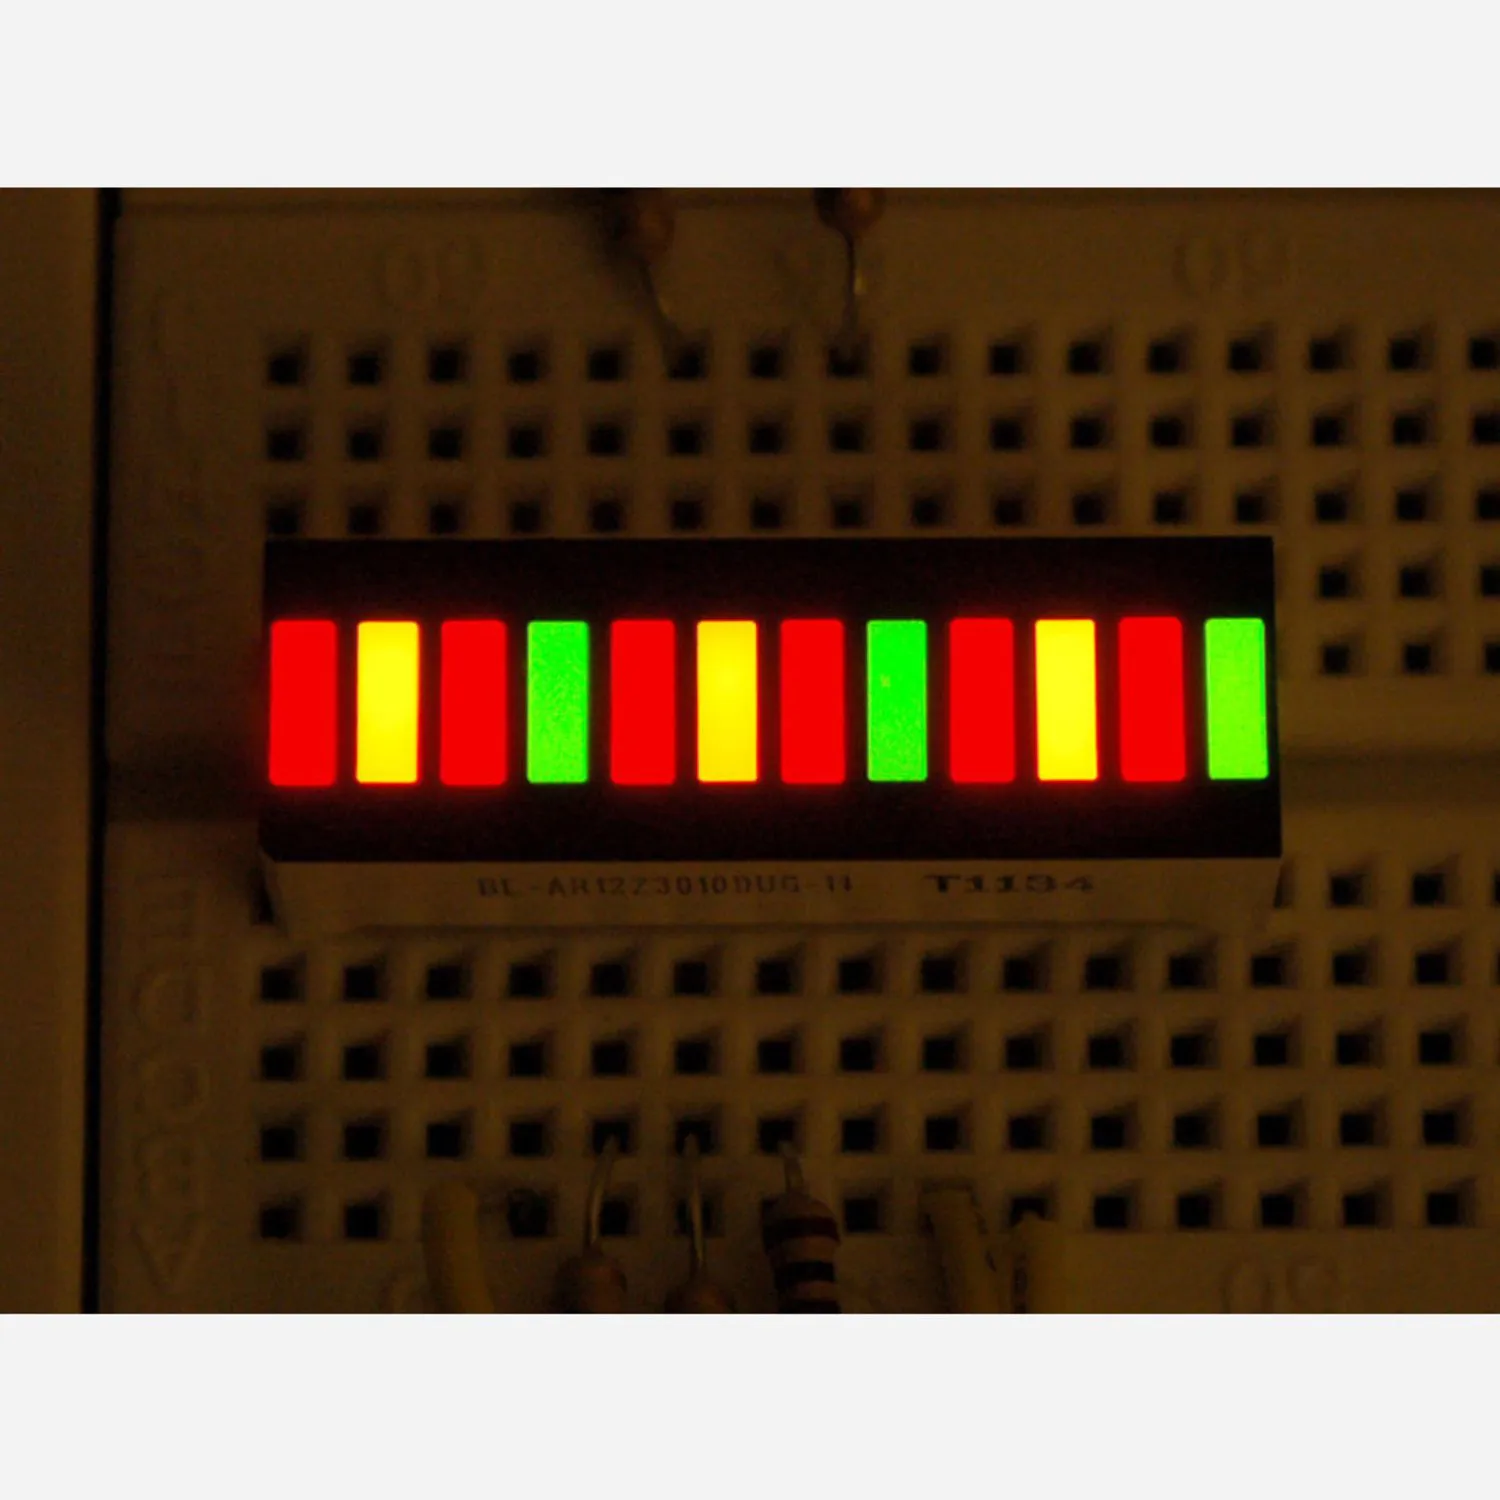 Photo of Bi-Color (Red/Green) 12-LED Bargraph